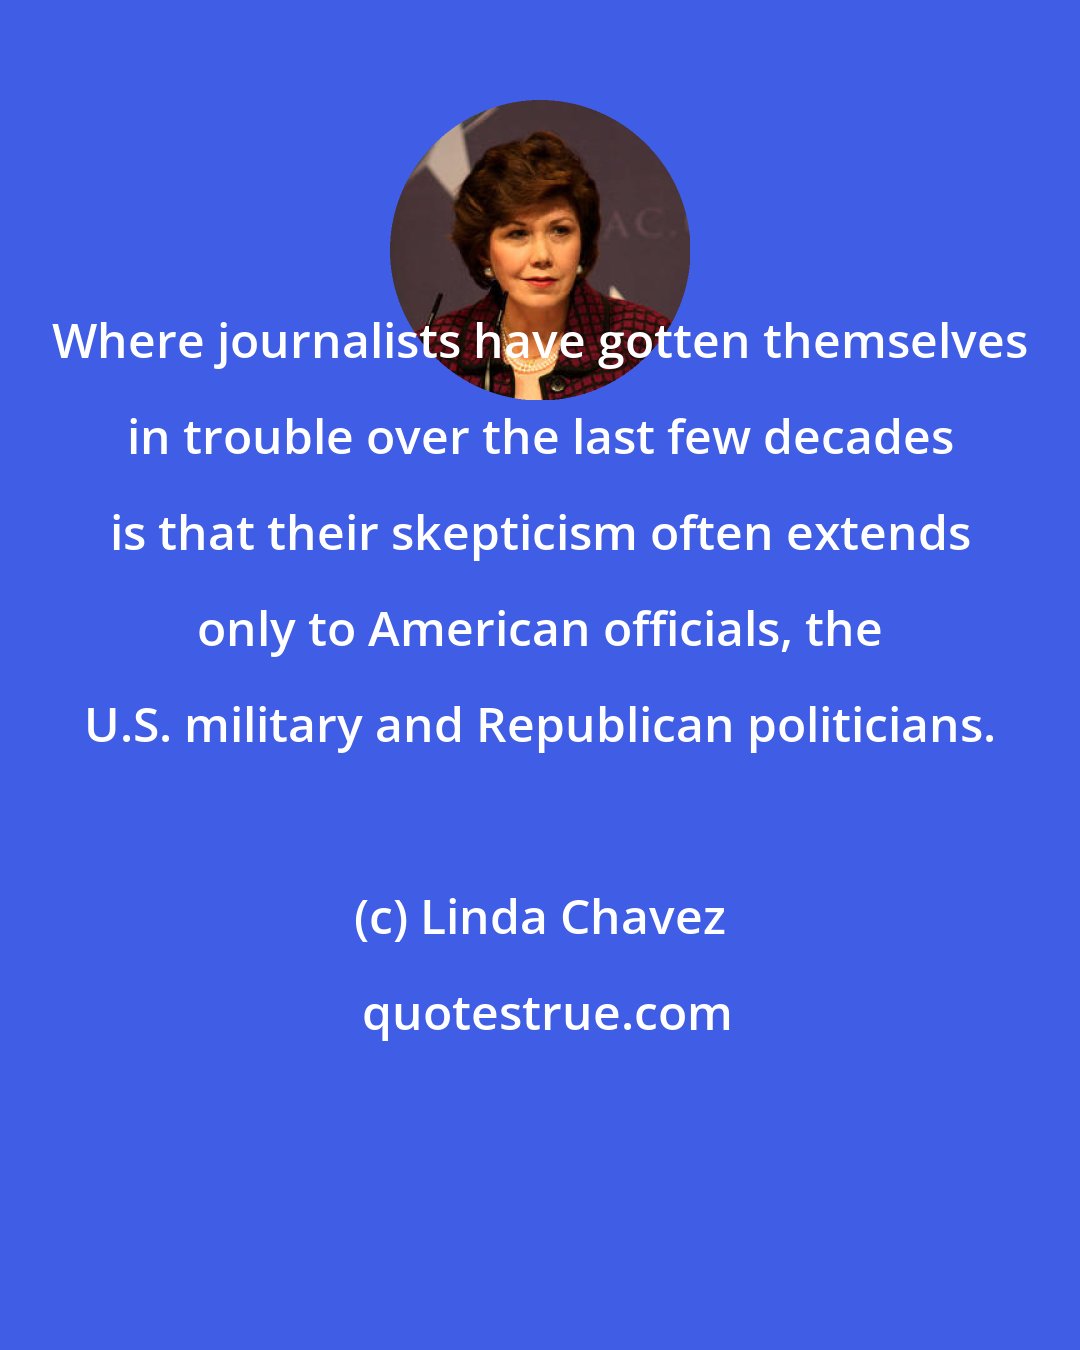 Linda Chavez: Where journalists have gotten themselves in trouble over the last few decades is that their skepticism often extends only to American officials, the U.S. military and Republican politicians.